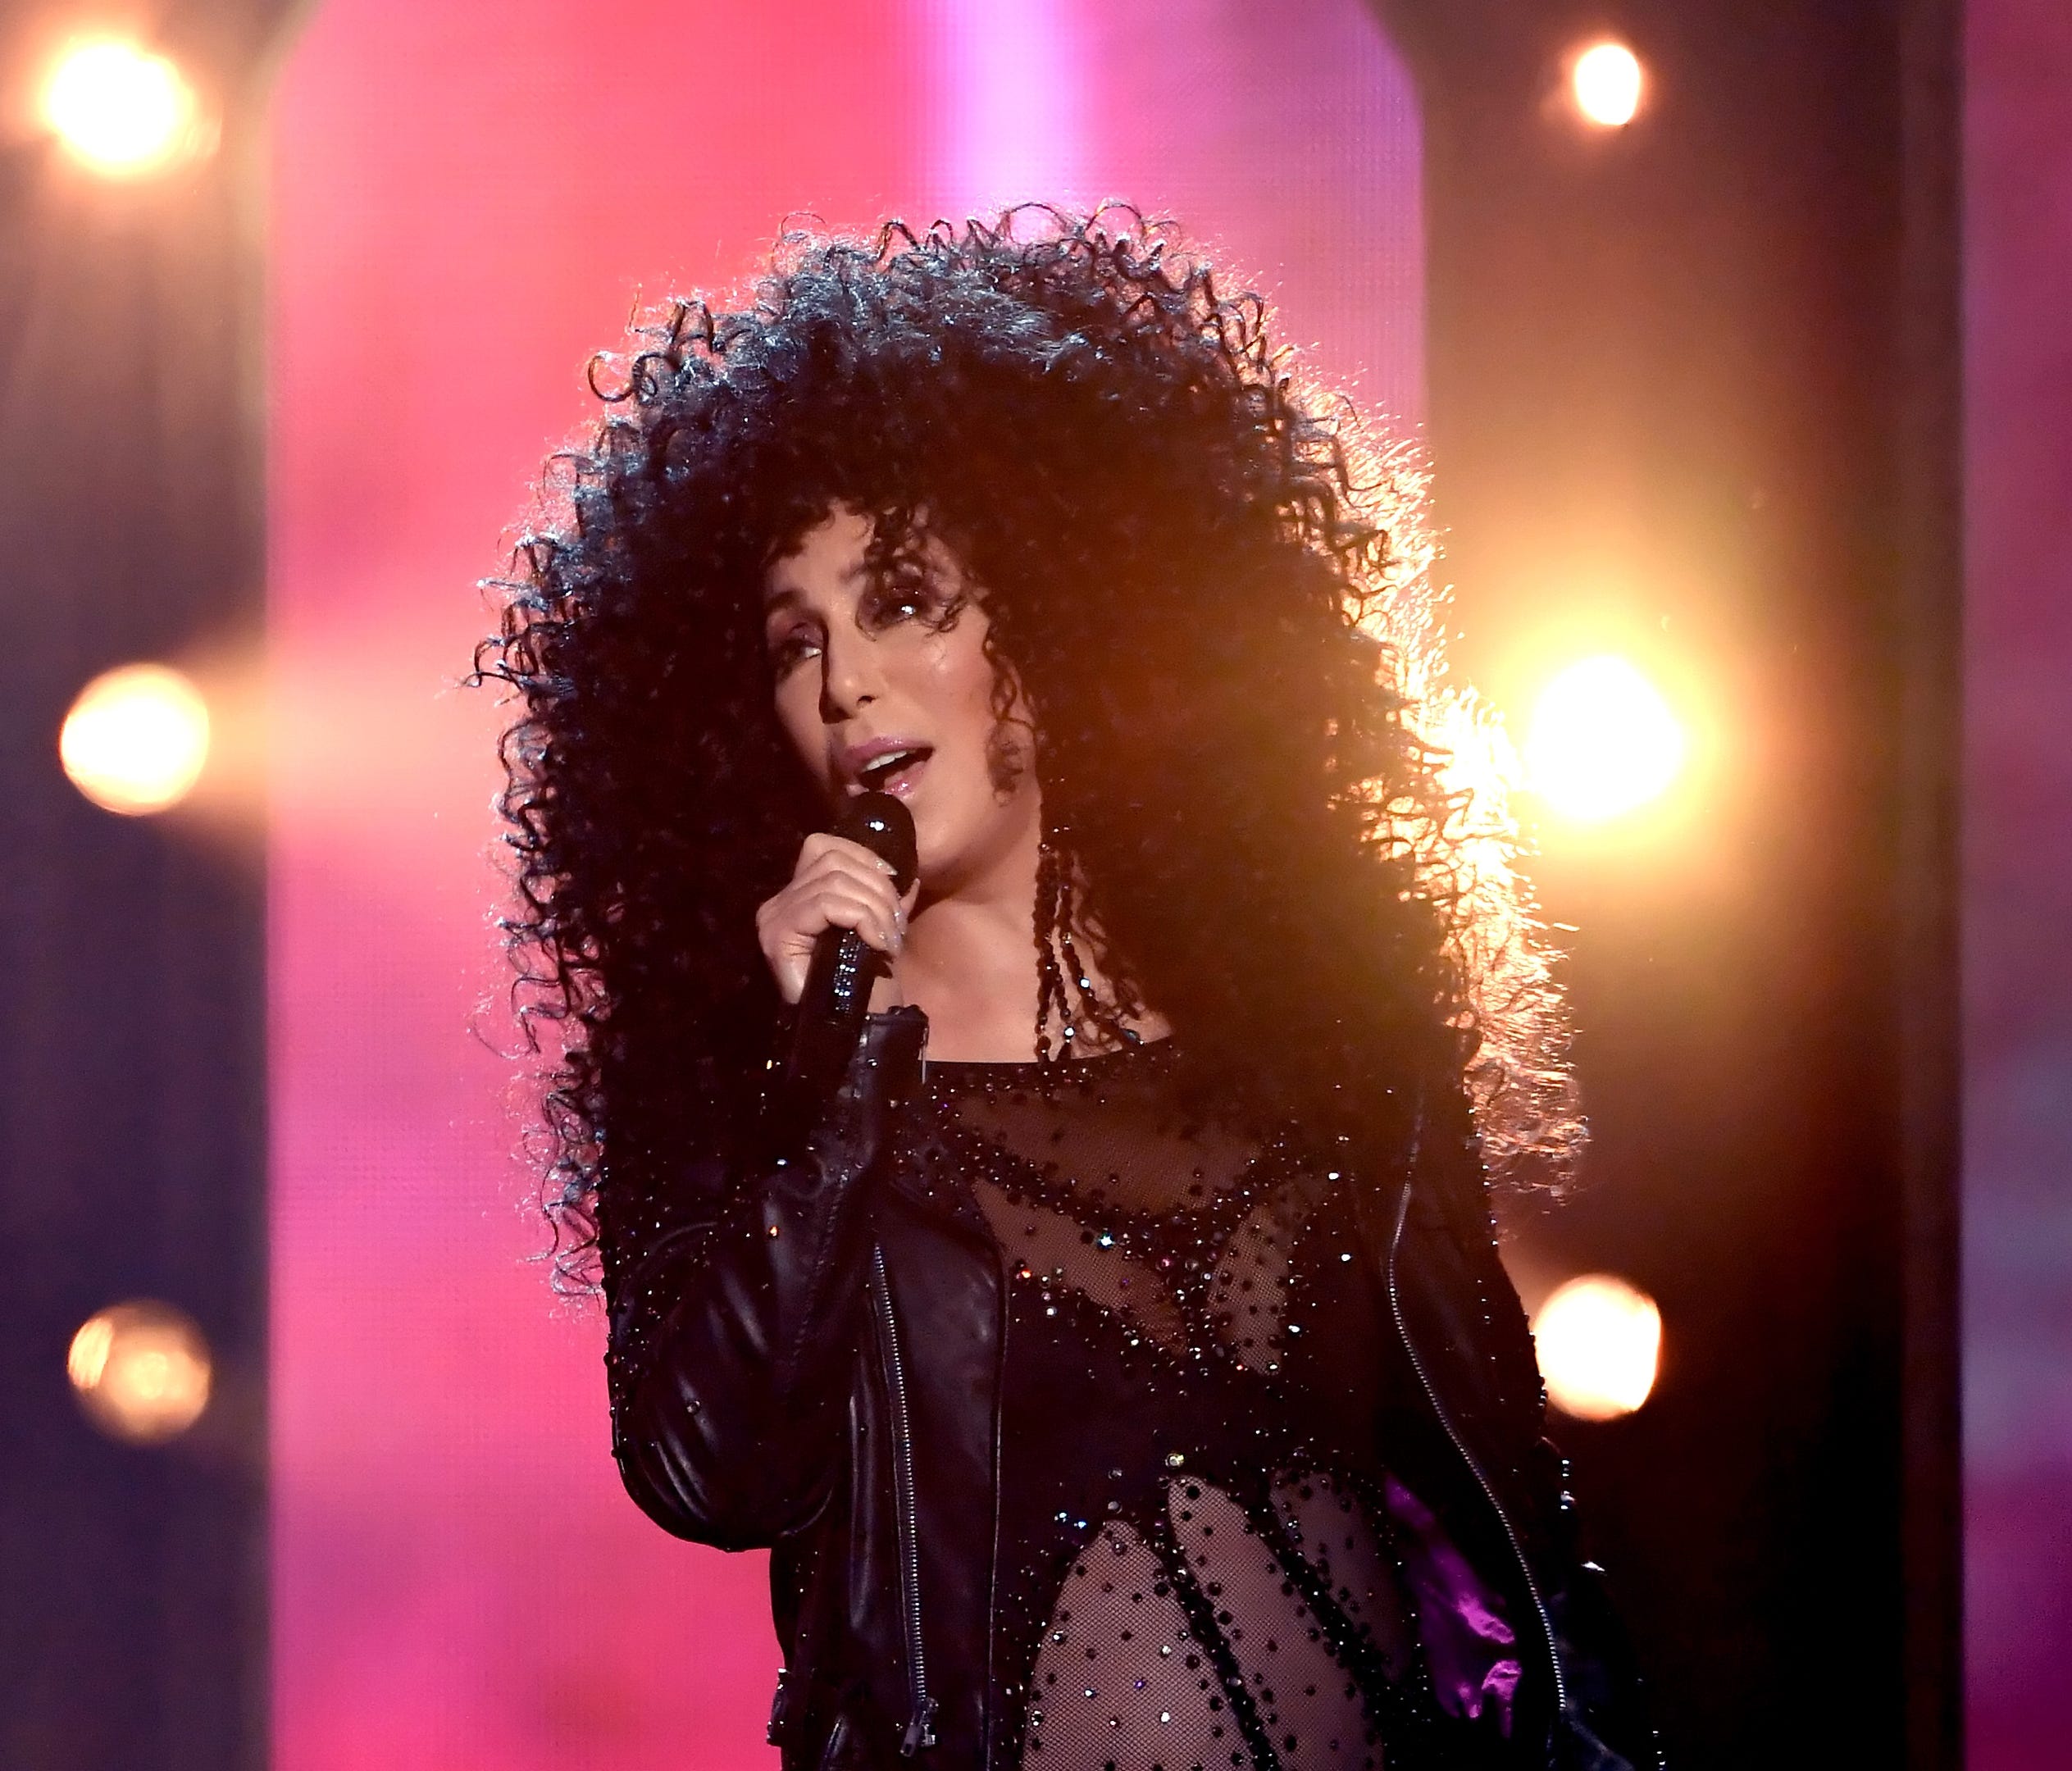 Cher performs during the 2017 Billboard Music Awards on May 21, 2017 in Las Vegas, Nevada.